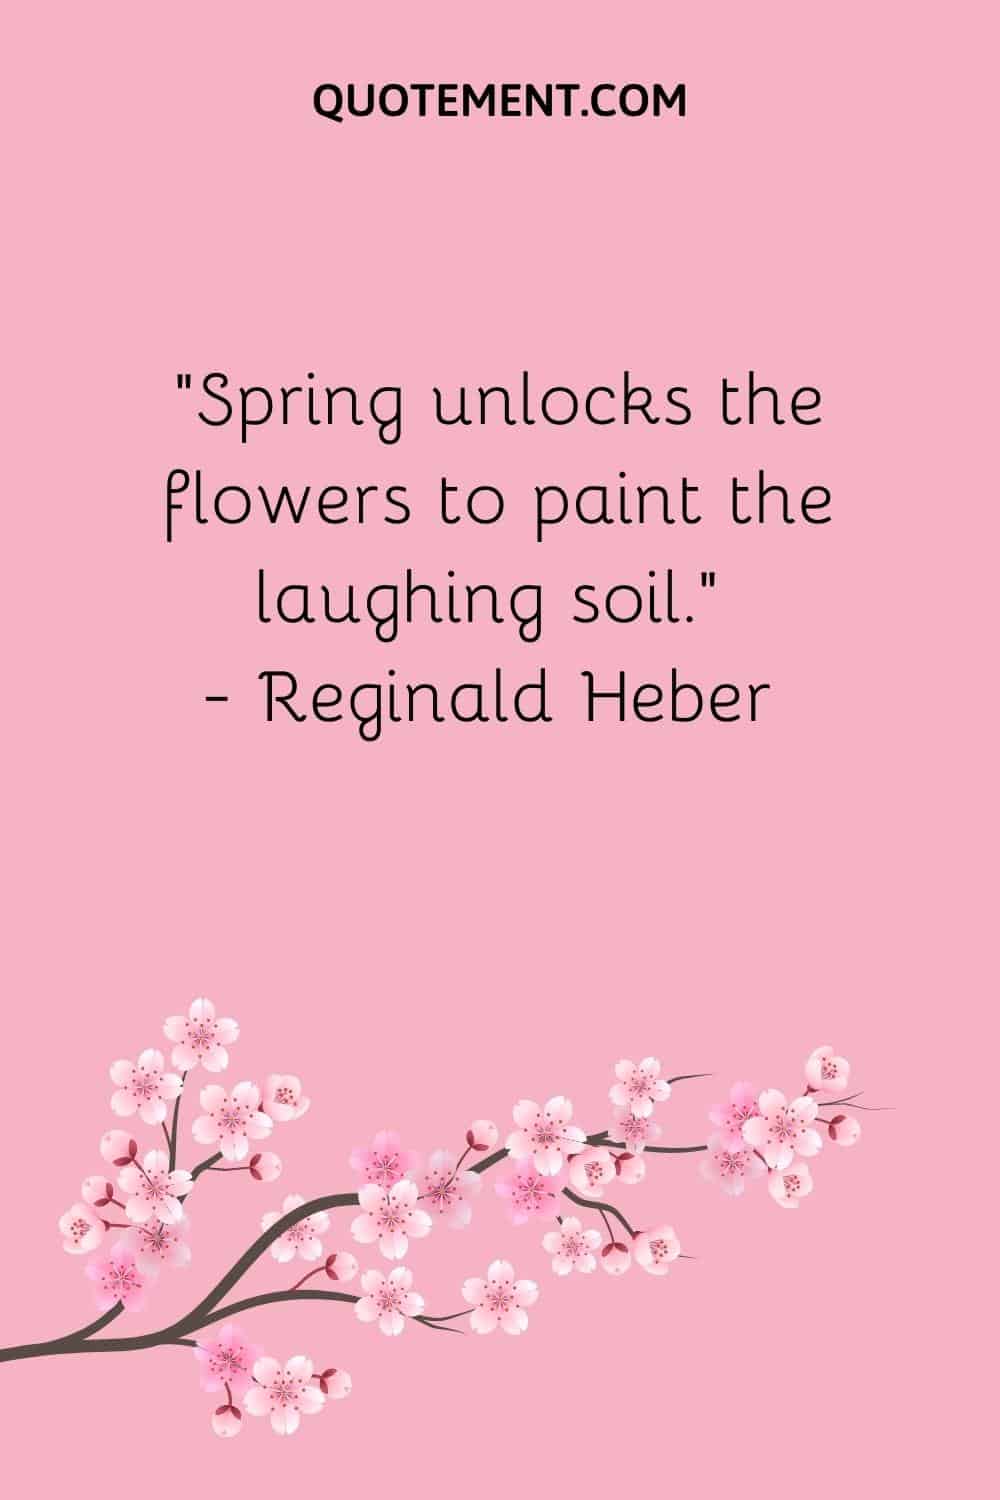 “Spring unlocks the flowers to paint the laughing soil.” — Reginald Heber